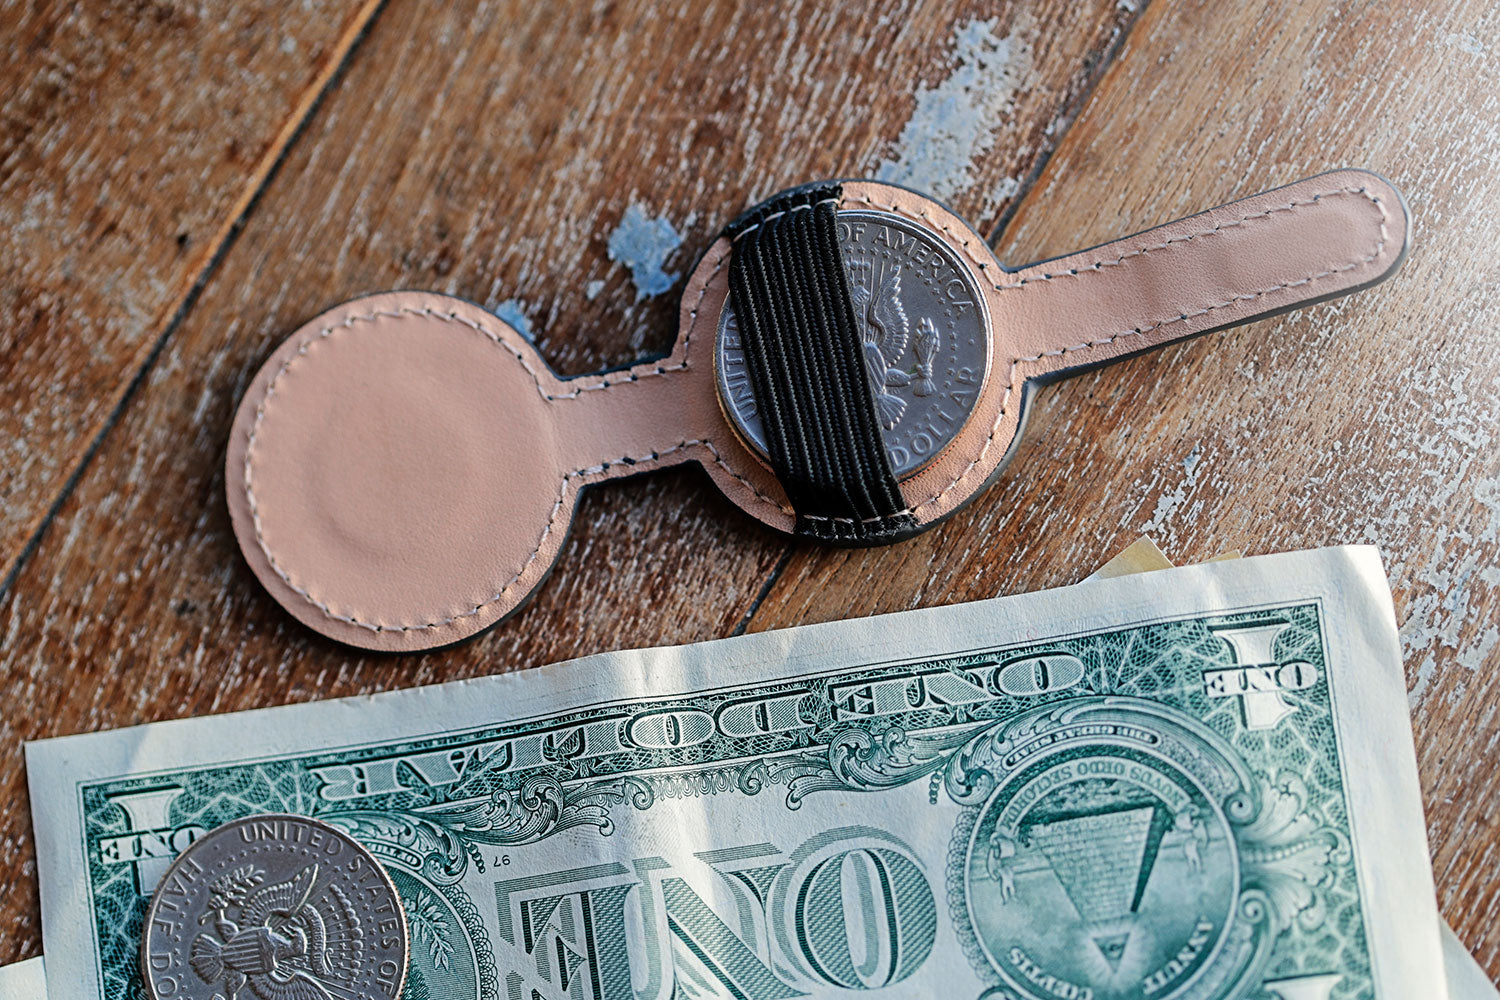 Quiver Coin Holder by Ellusionist | Ellusionist